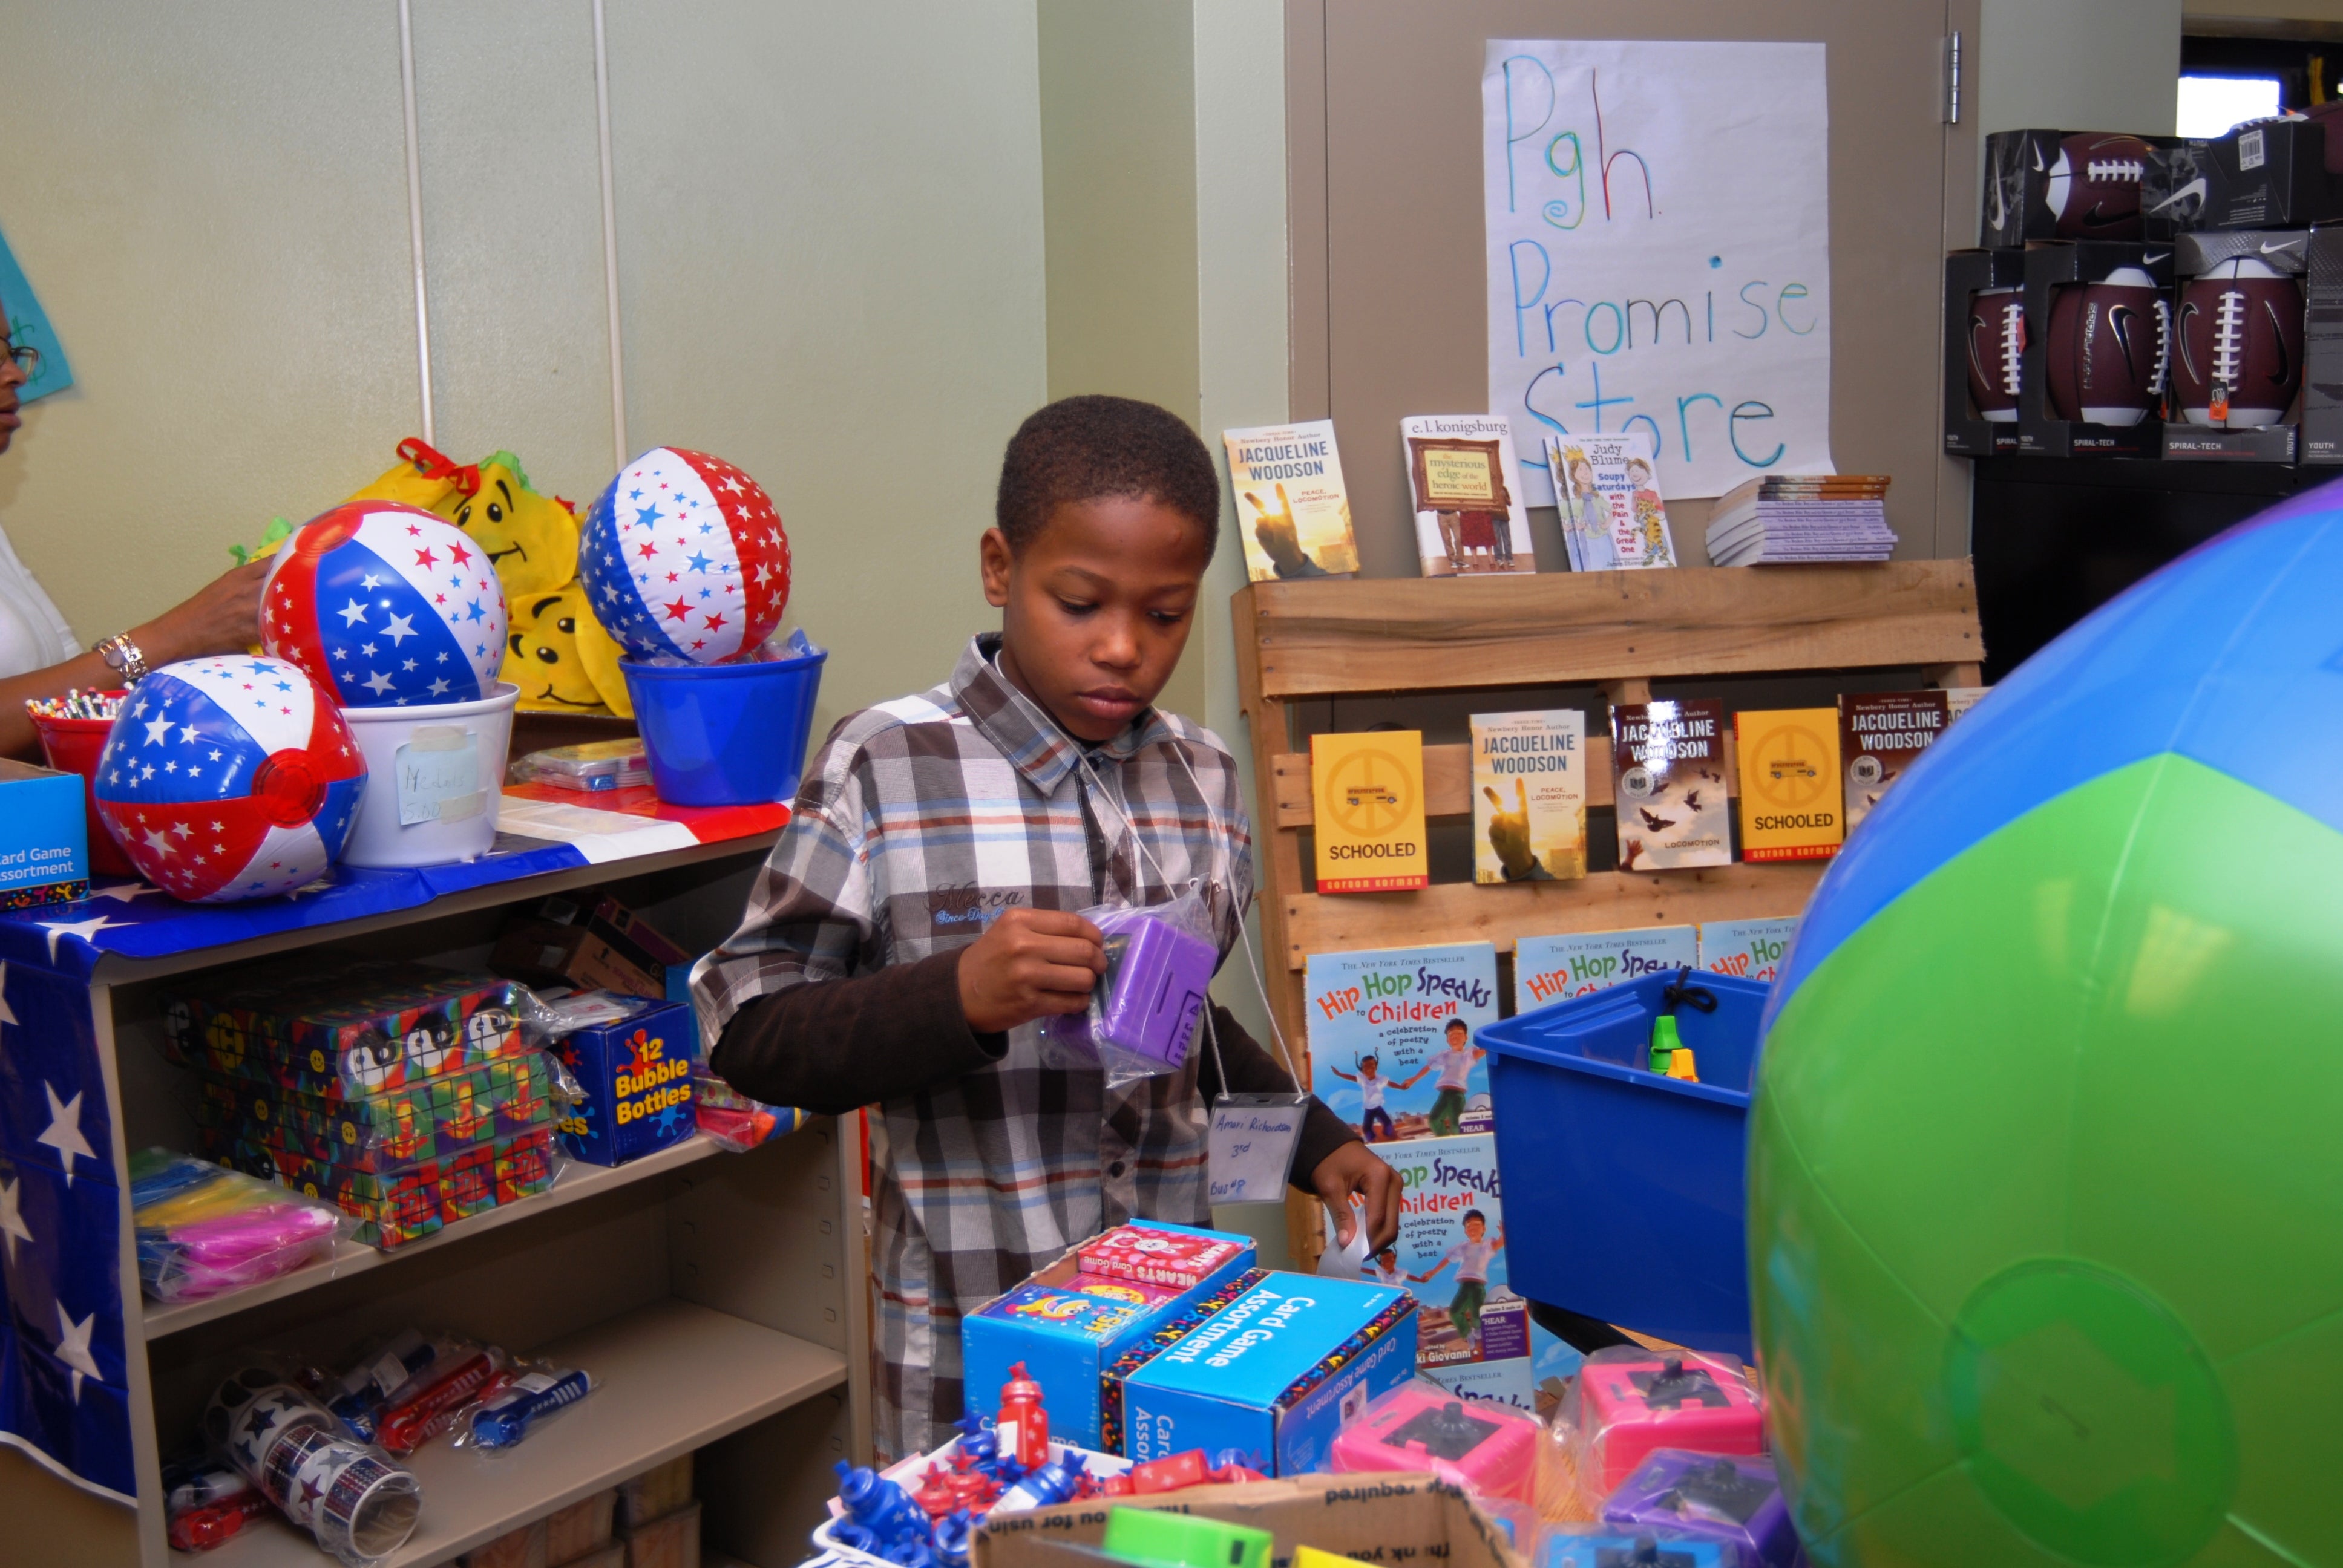 A boy mans his "Promise Store" during an afterschool program.